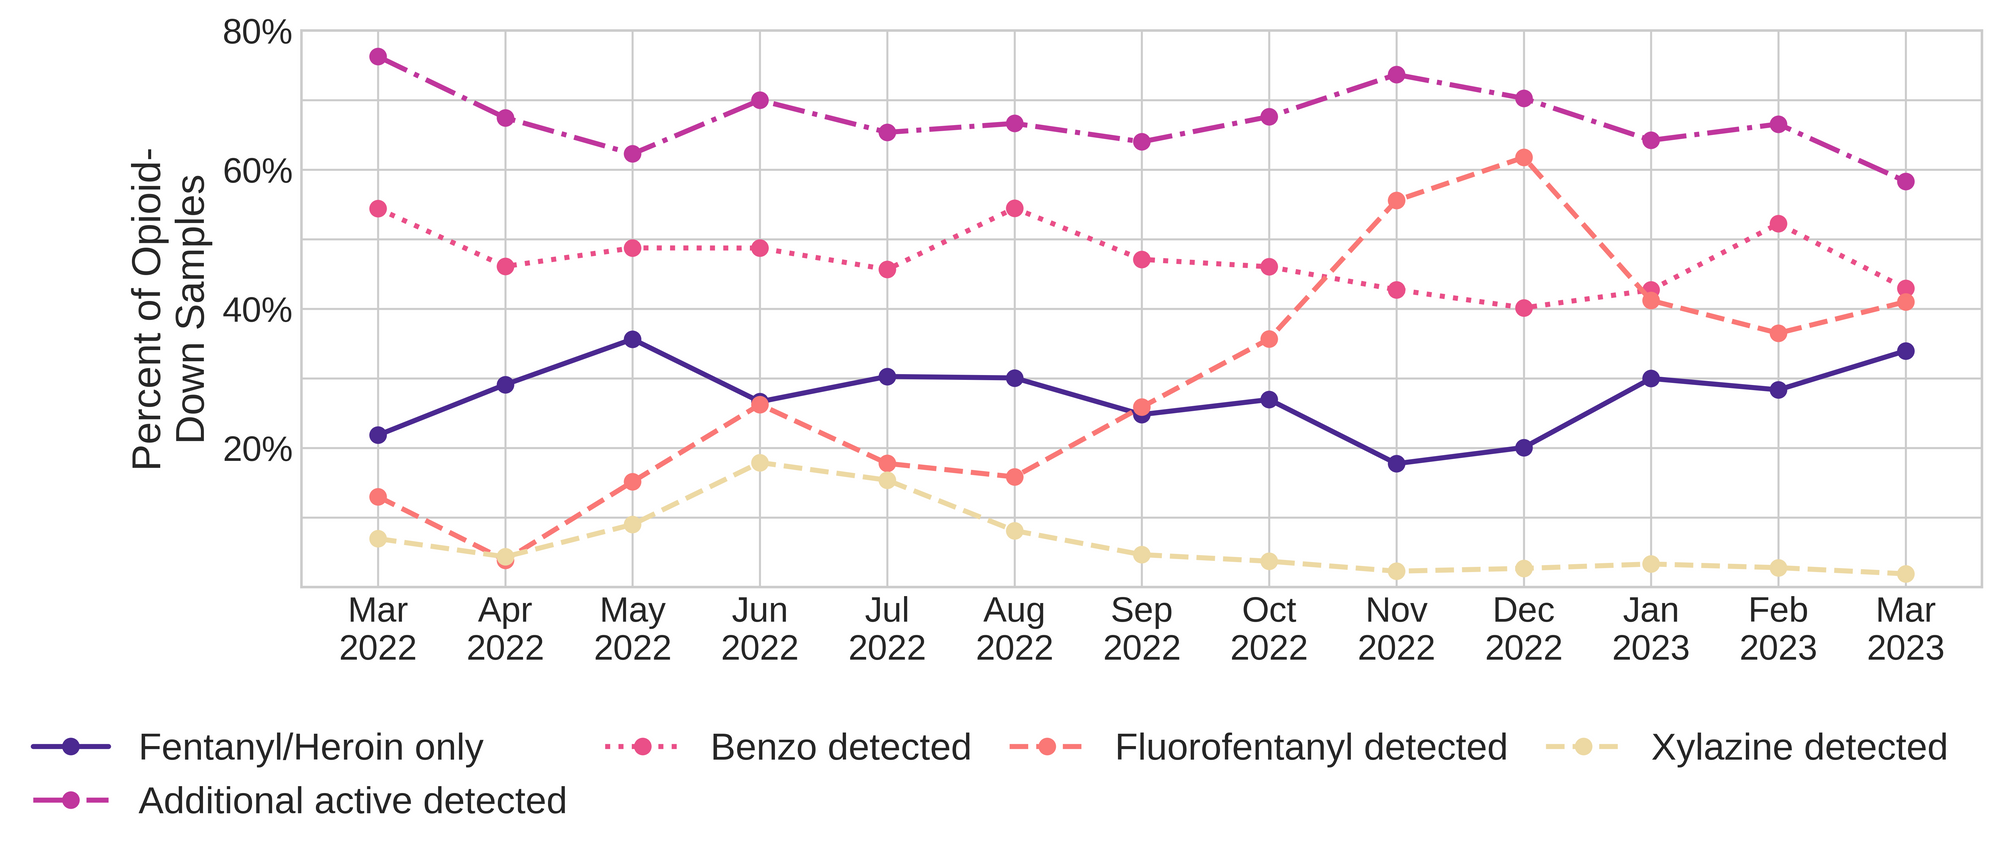 Figure 3. The percentage of expected opioid-down samples checked between March 2022 and March 2023 that only contained fentanyl/heroin actives (solid dark purple), opioid-down samples with an additional active detected (dot-dashed magenta), opioid-down samples that contained a benzodiazepine-related drug (dotted pink), opioid-down samples that contained fluorofentanyl (dashed salmon), and opioid-down samples that contained xylazine (dashed yellow).